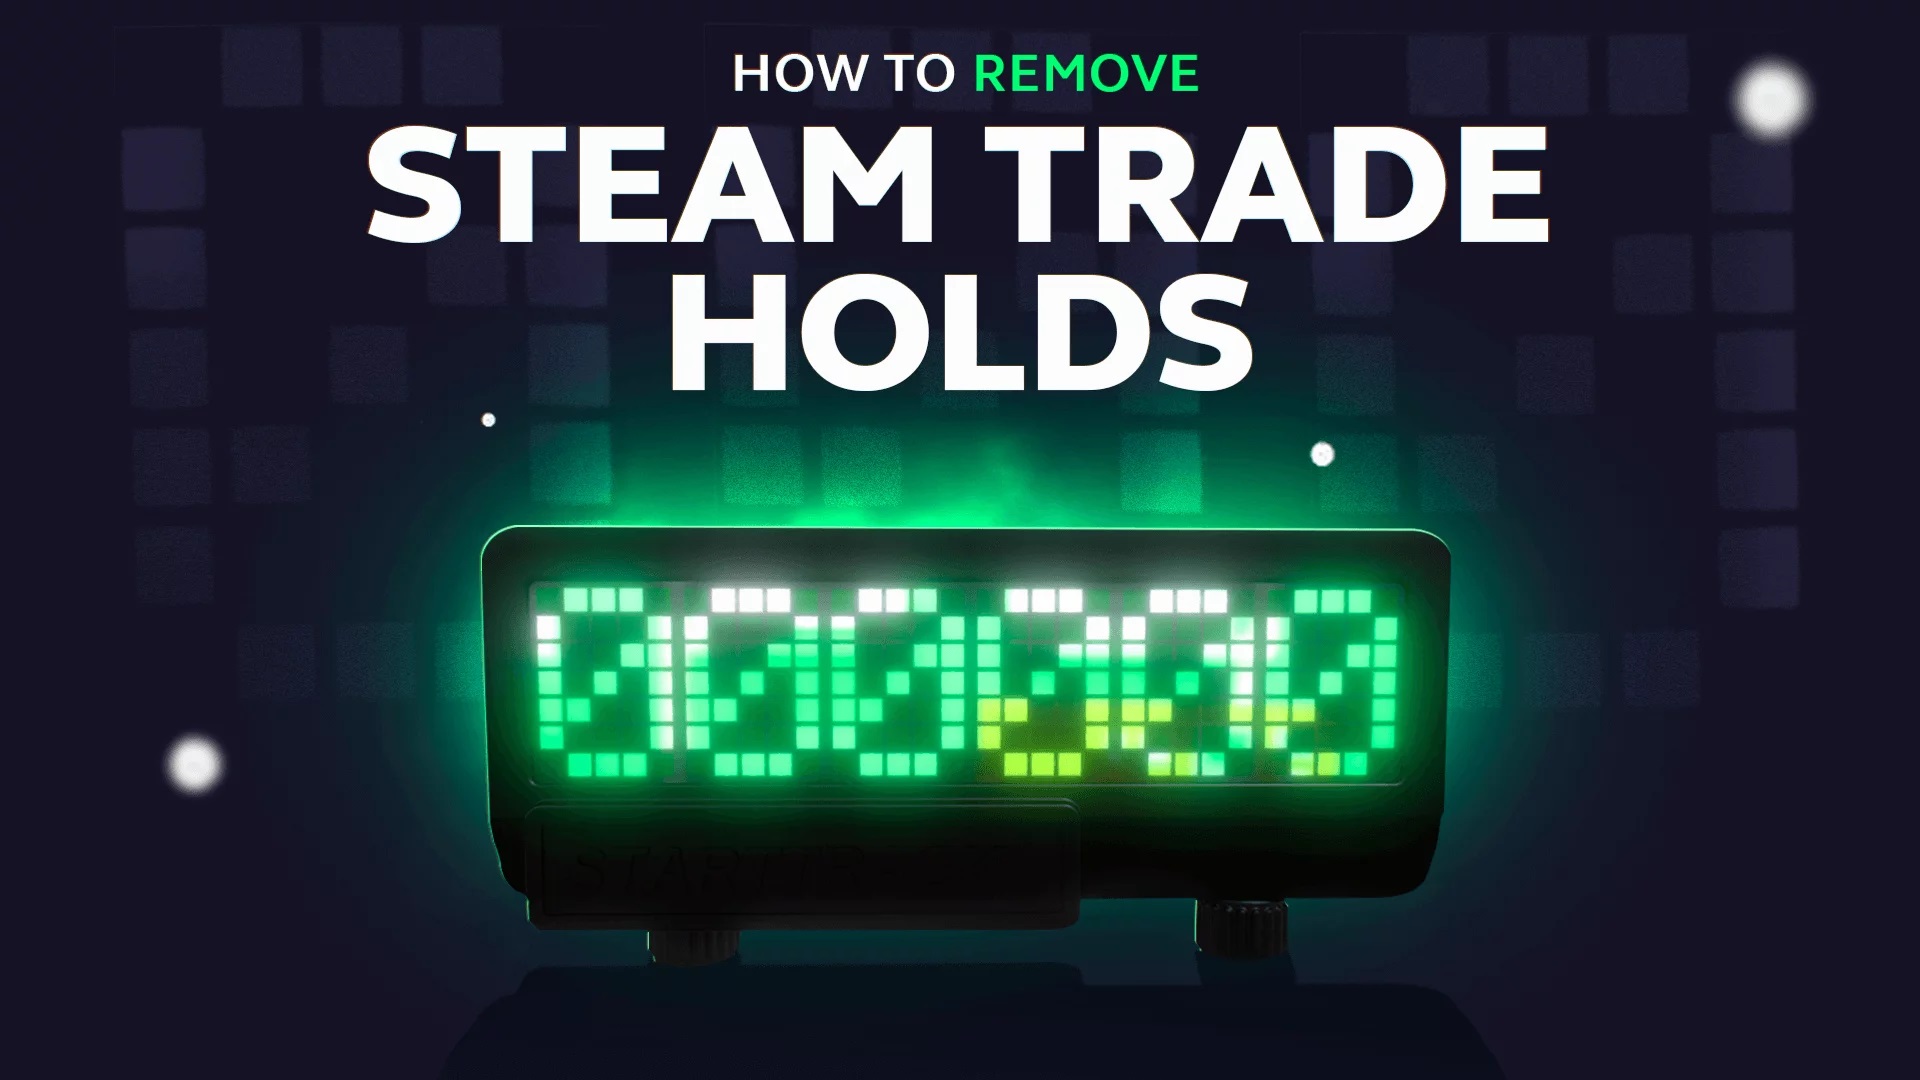 Steam Trade Holds